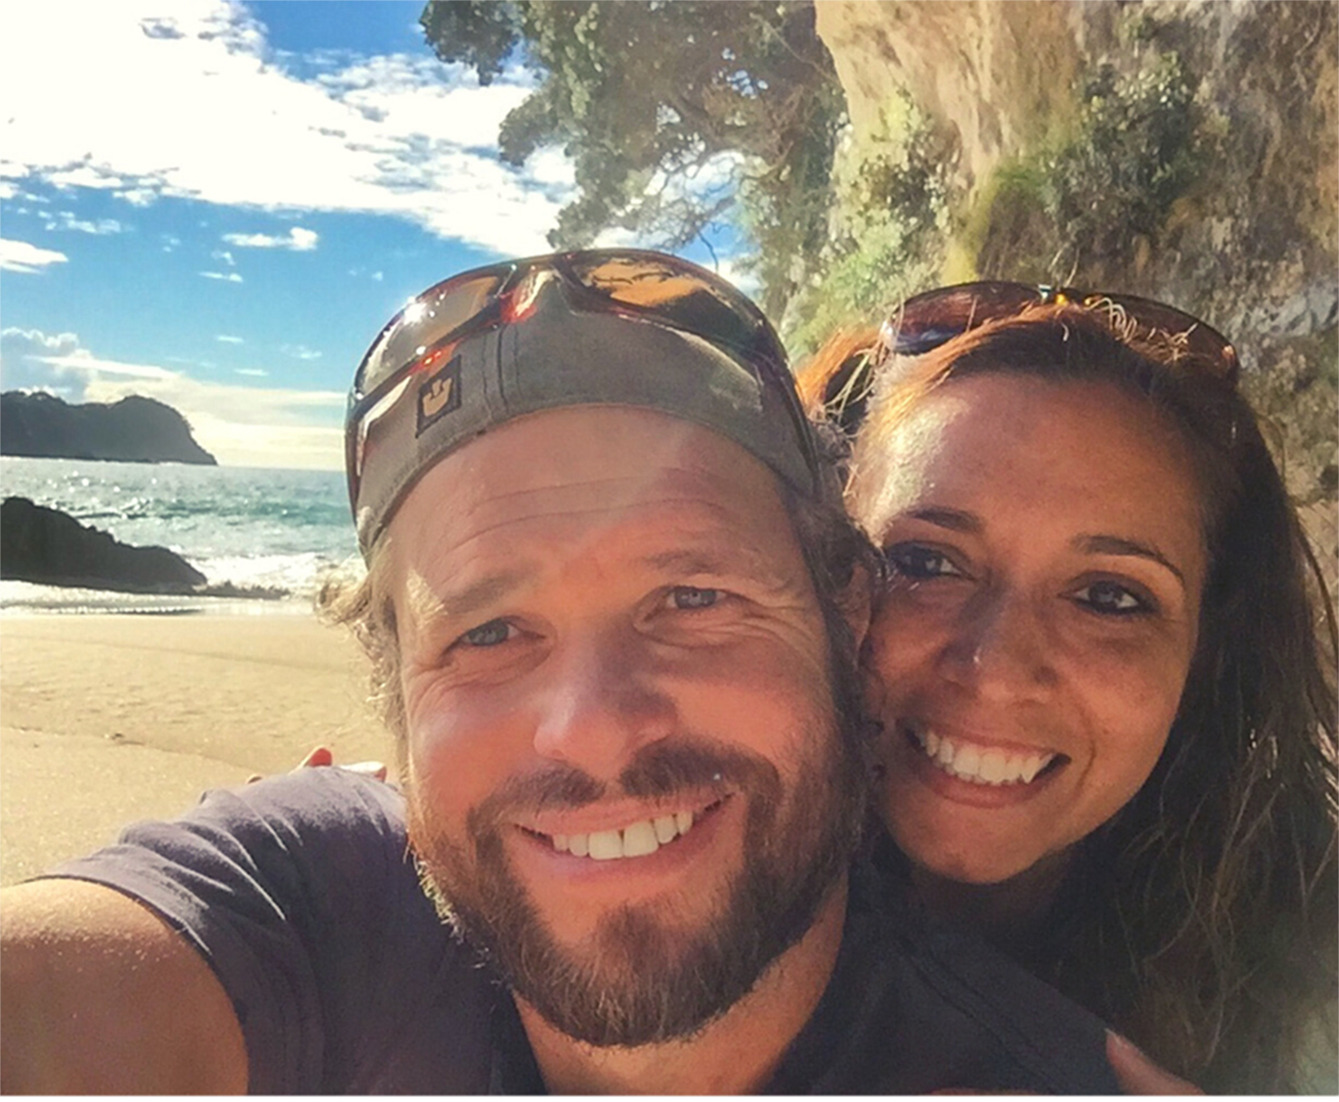 Beach Party Naked On Vimeo - Kiwi mum and dad's crusade against porn: Rob Cope and Zareen Sheikh-Cope  make documentary on what our kids watch online - NZ Herald